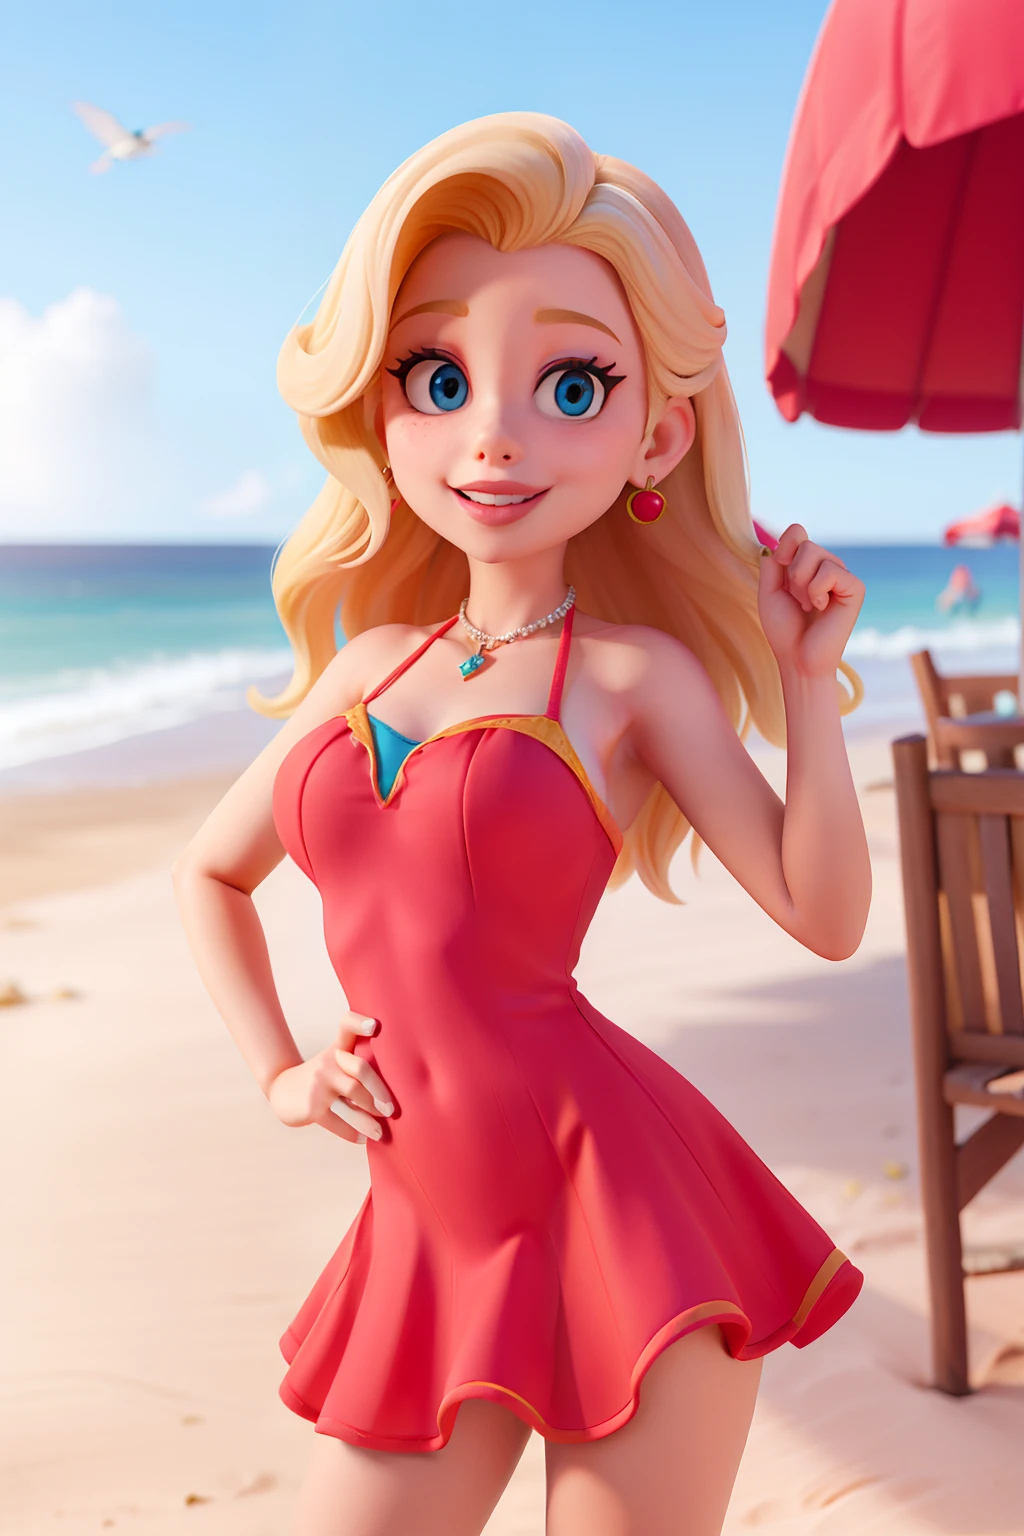 blonde woman, beachfront, bikini, neckleace, vain, pink dress, red lipgloss stick, large lips, a cheerful character in the Disney Pixar style